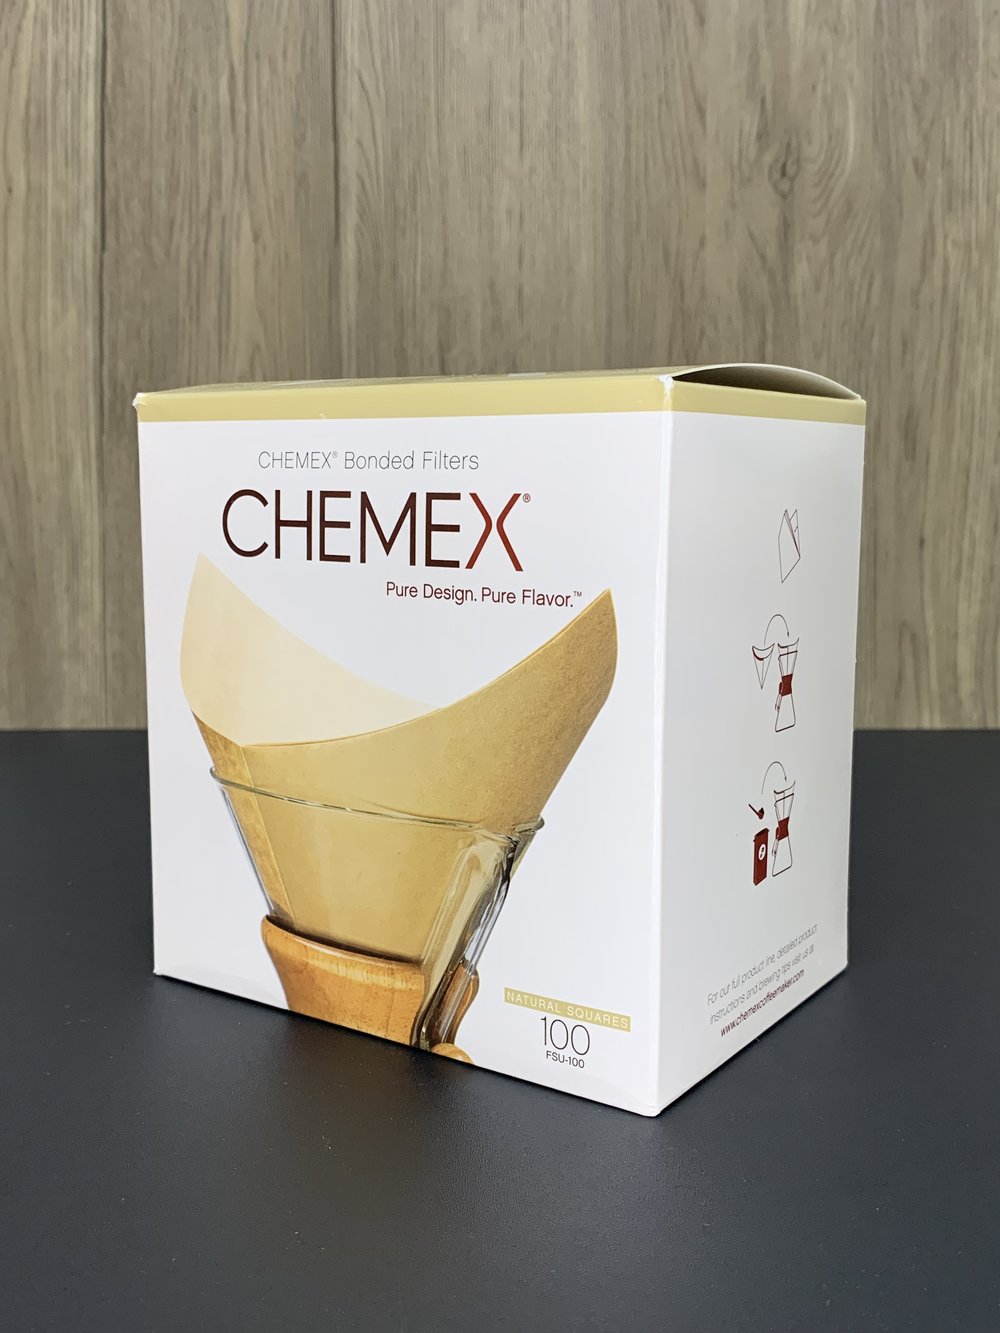 Chemex Filters, Bonded, Squares - 100 filters